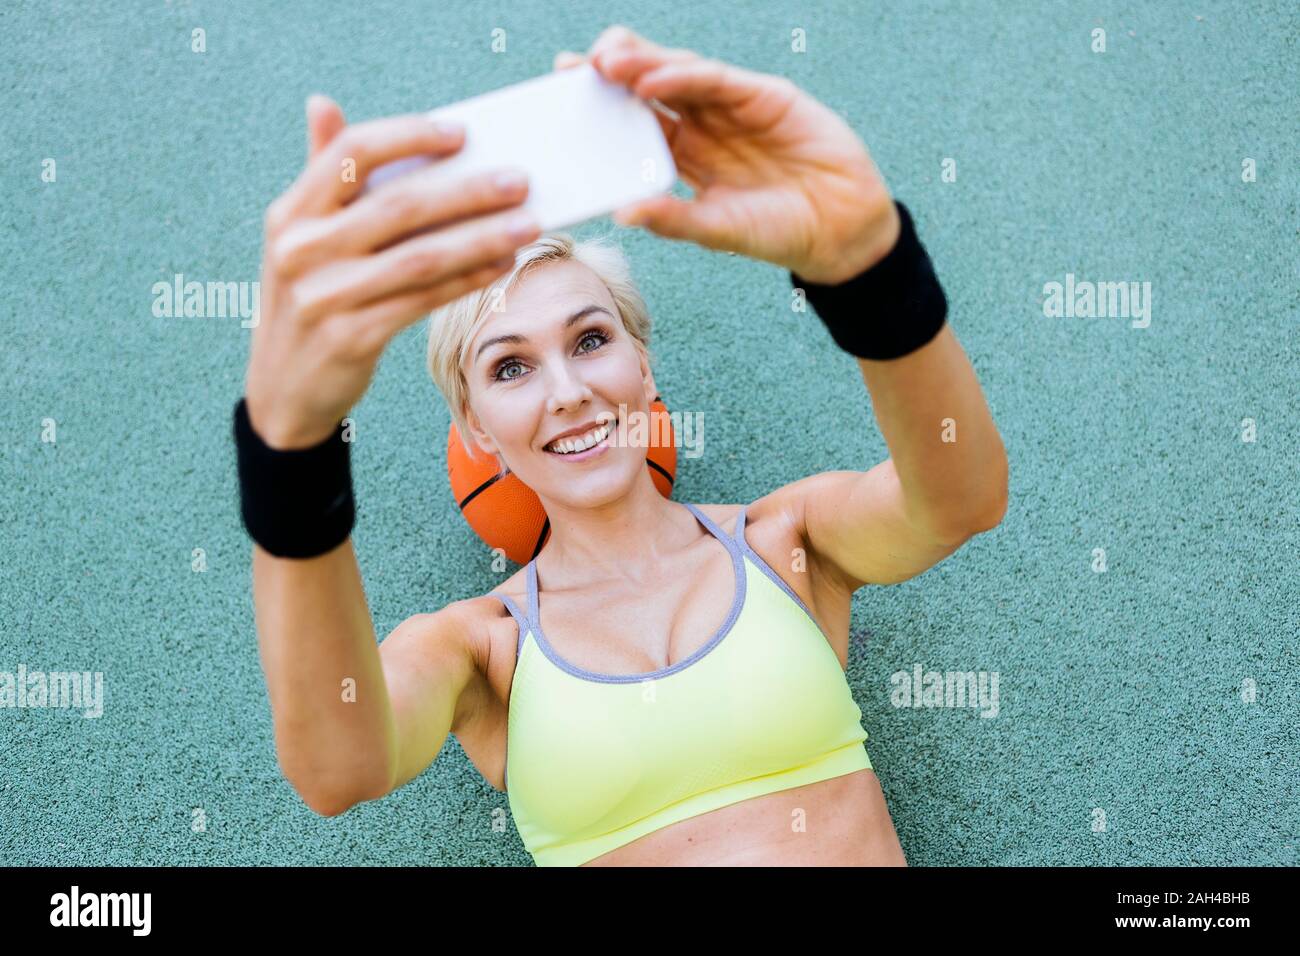 Blonde woman lying on basketball and taking a selfie Stock Photo